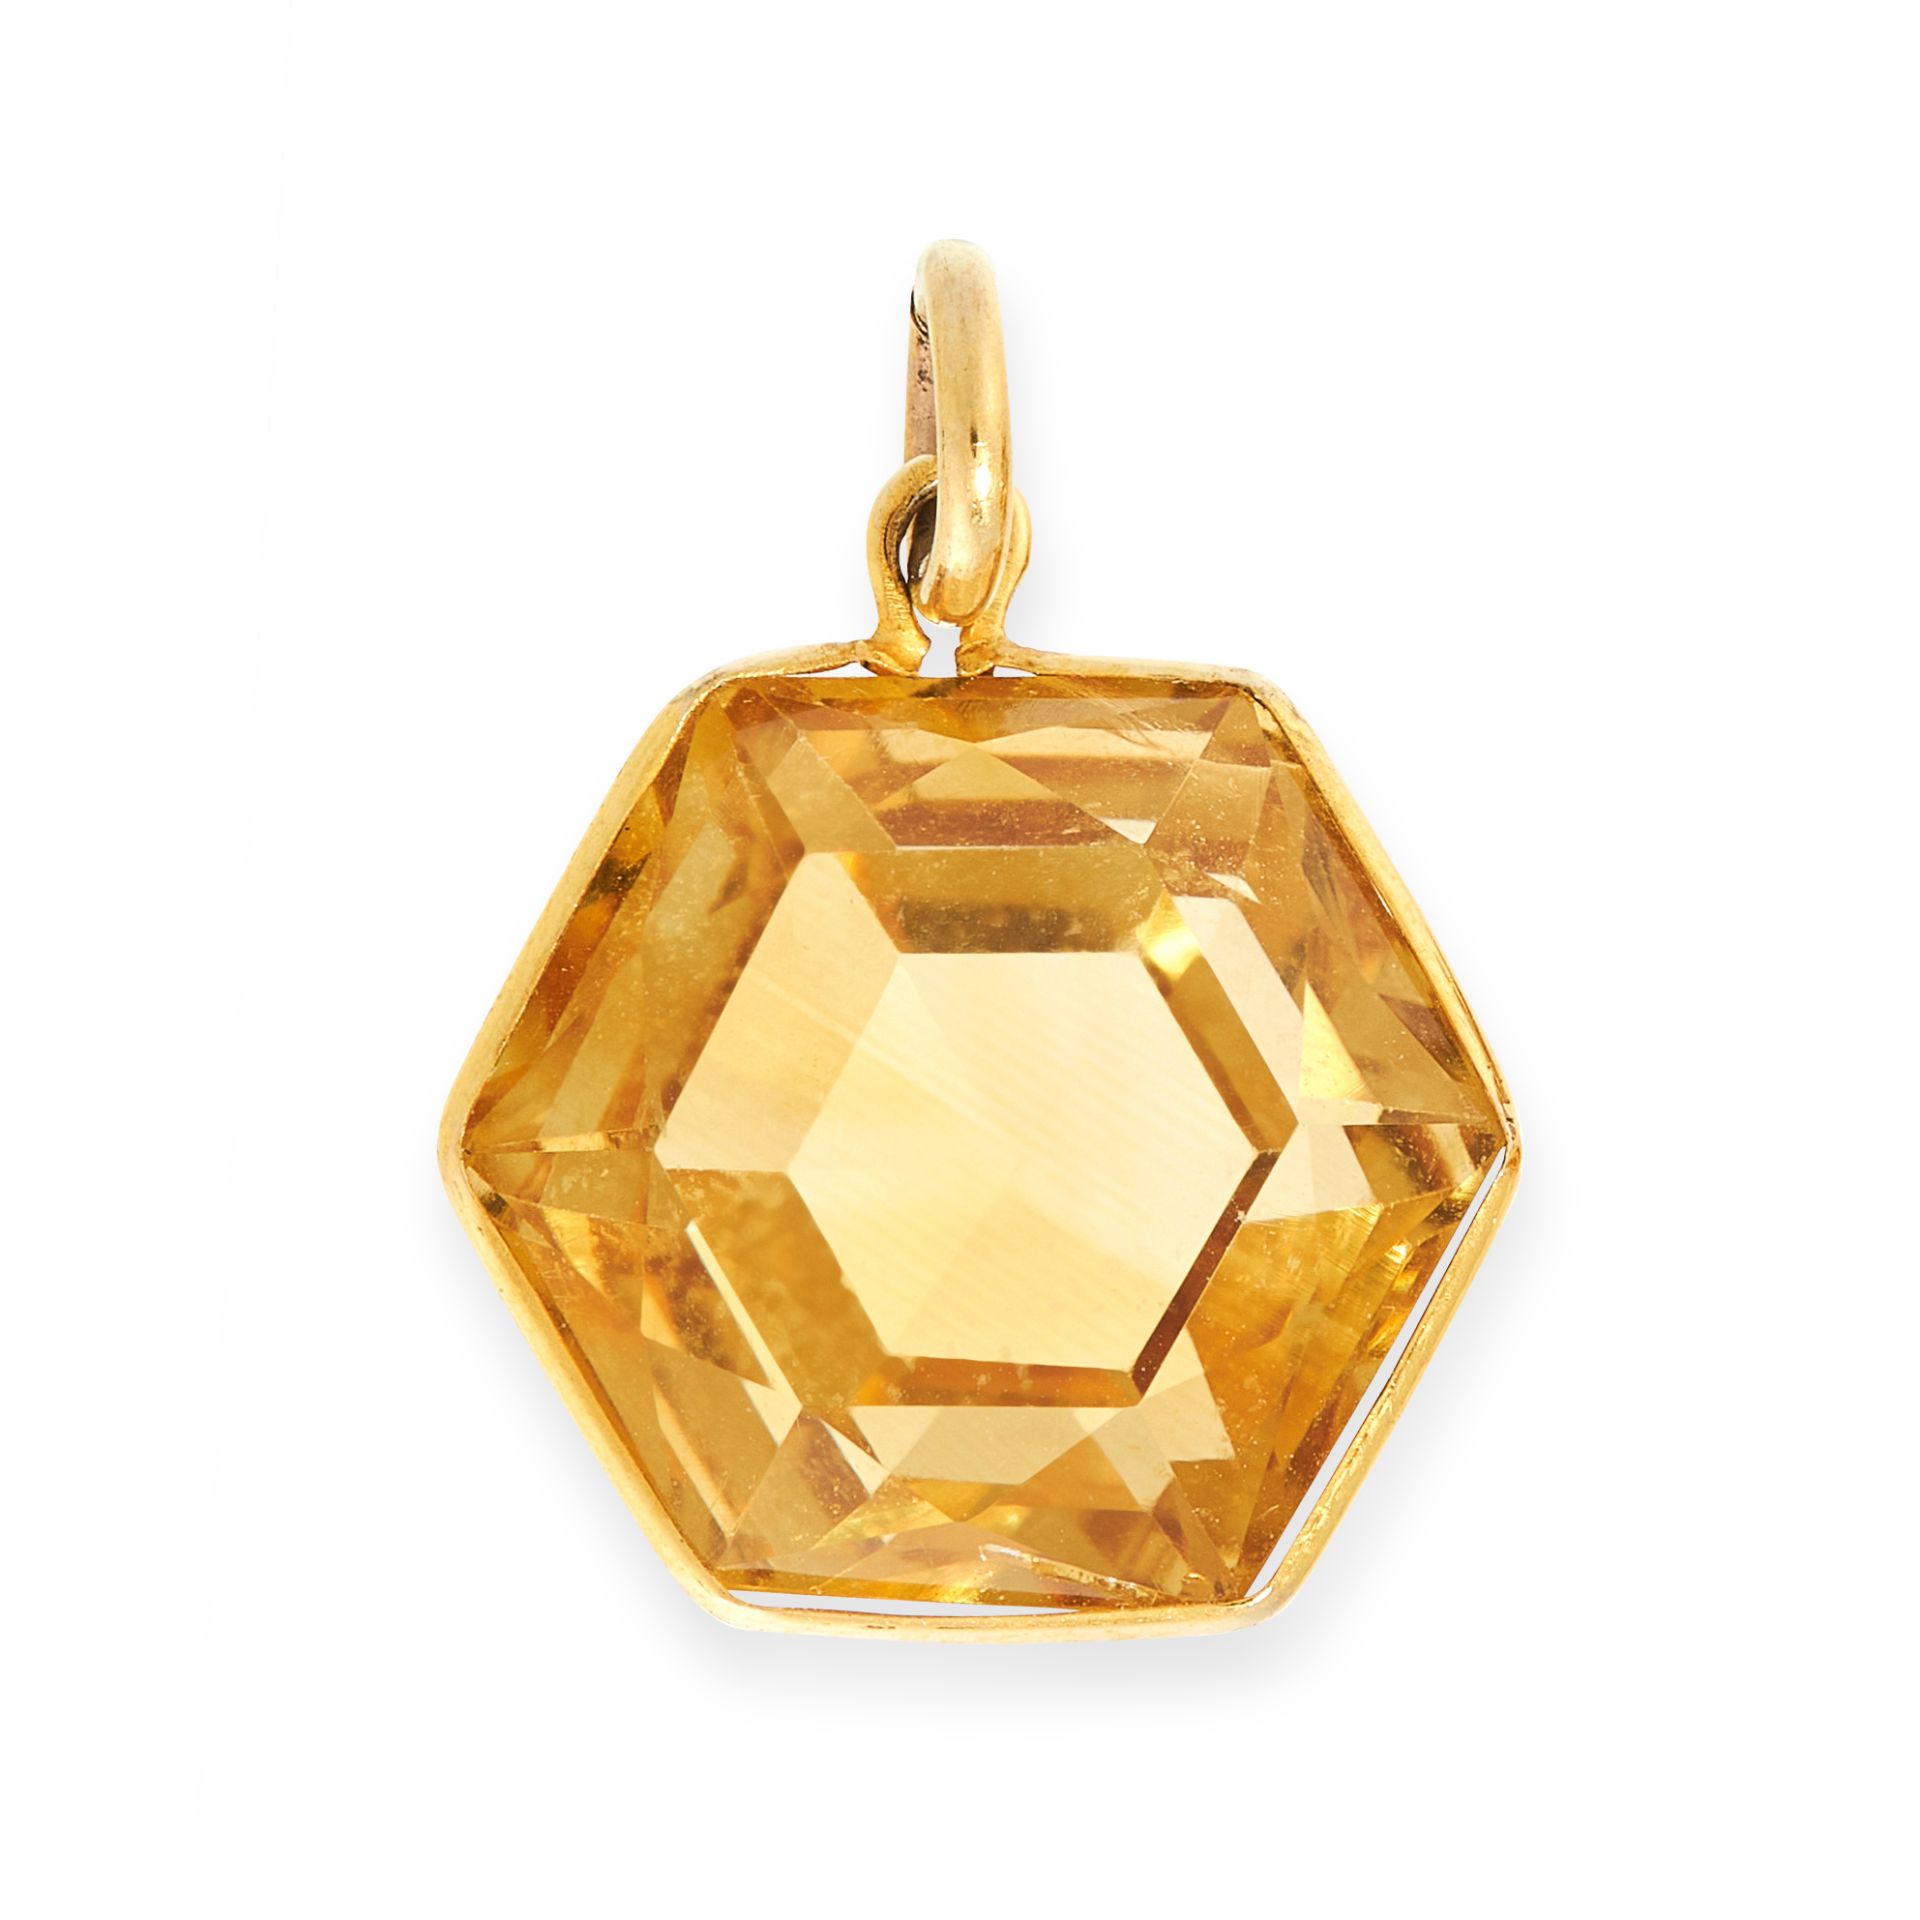 AN ANTIQUE CITRINE PENDANT, EARLY 20TH CENTURY in yellow gold, set with a hexagonal step cut